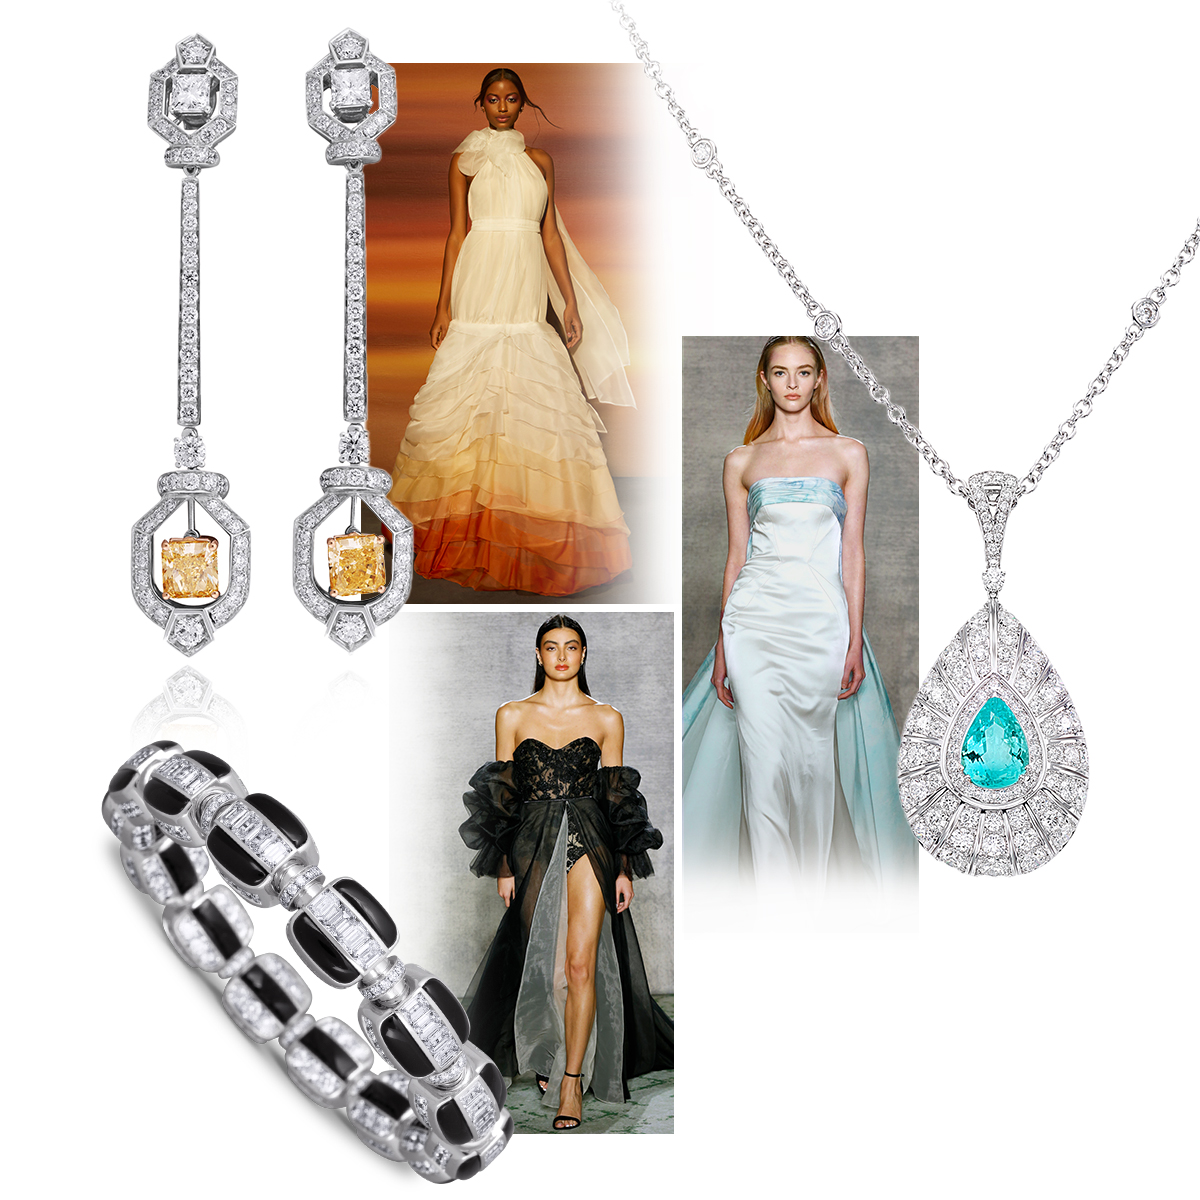 PICCHIOTTI jewelry collage with models. Clockwise from upper right – PICCHIOTTI Essentially Color Diamond and Paraiba Tourmaline pendant necklace, Madeline Gardner F/W 2023, Madeline Gardner F/W 2023, PICCHIOTTI Reversible Xpandable™ bracelet with white diamond and black onyx, PICCHIOTTI Chandelier Collection drop earrings, Nadia Manjarrez